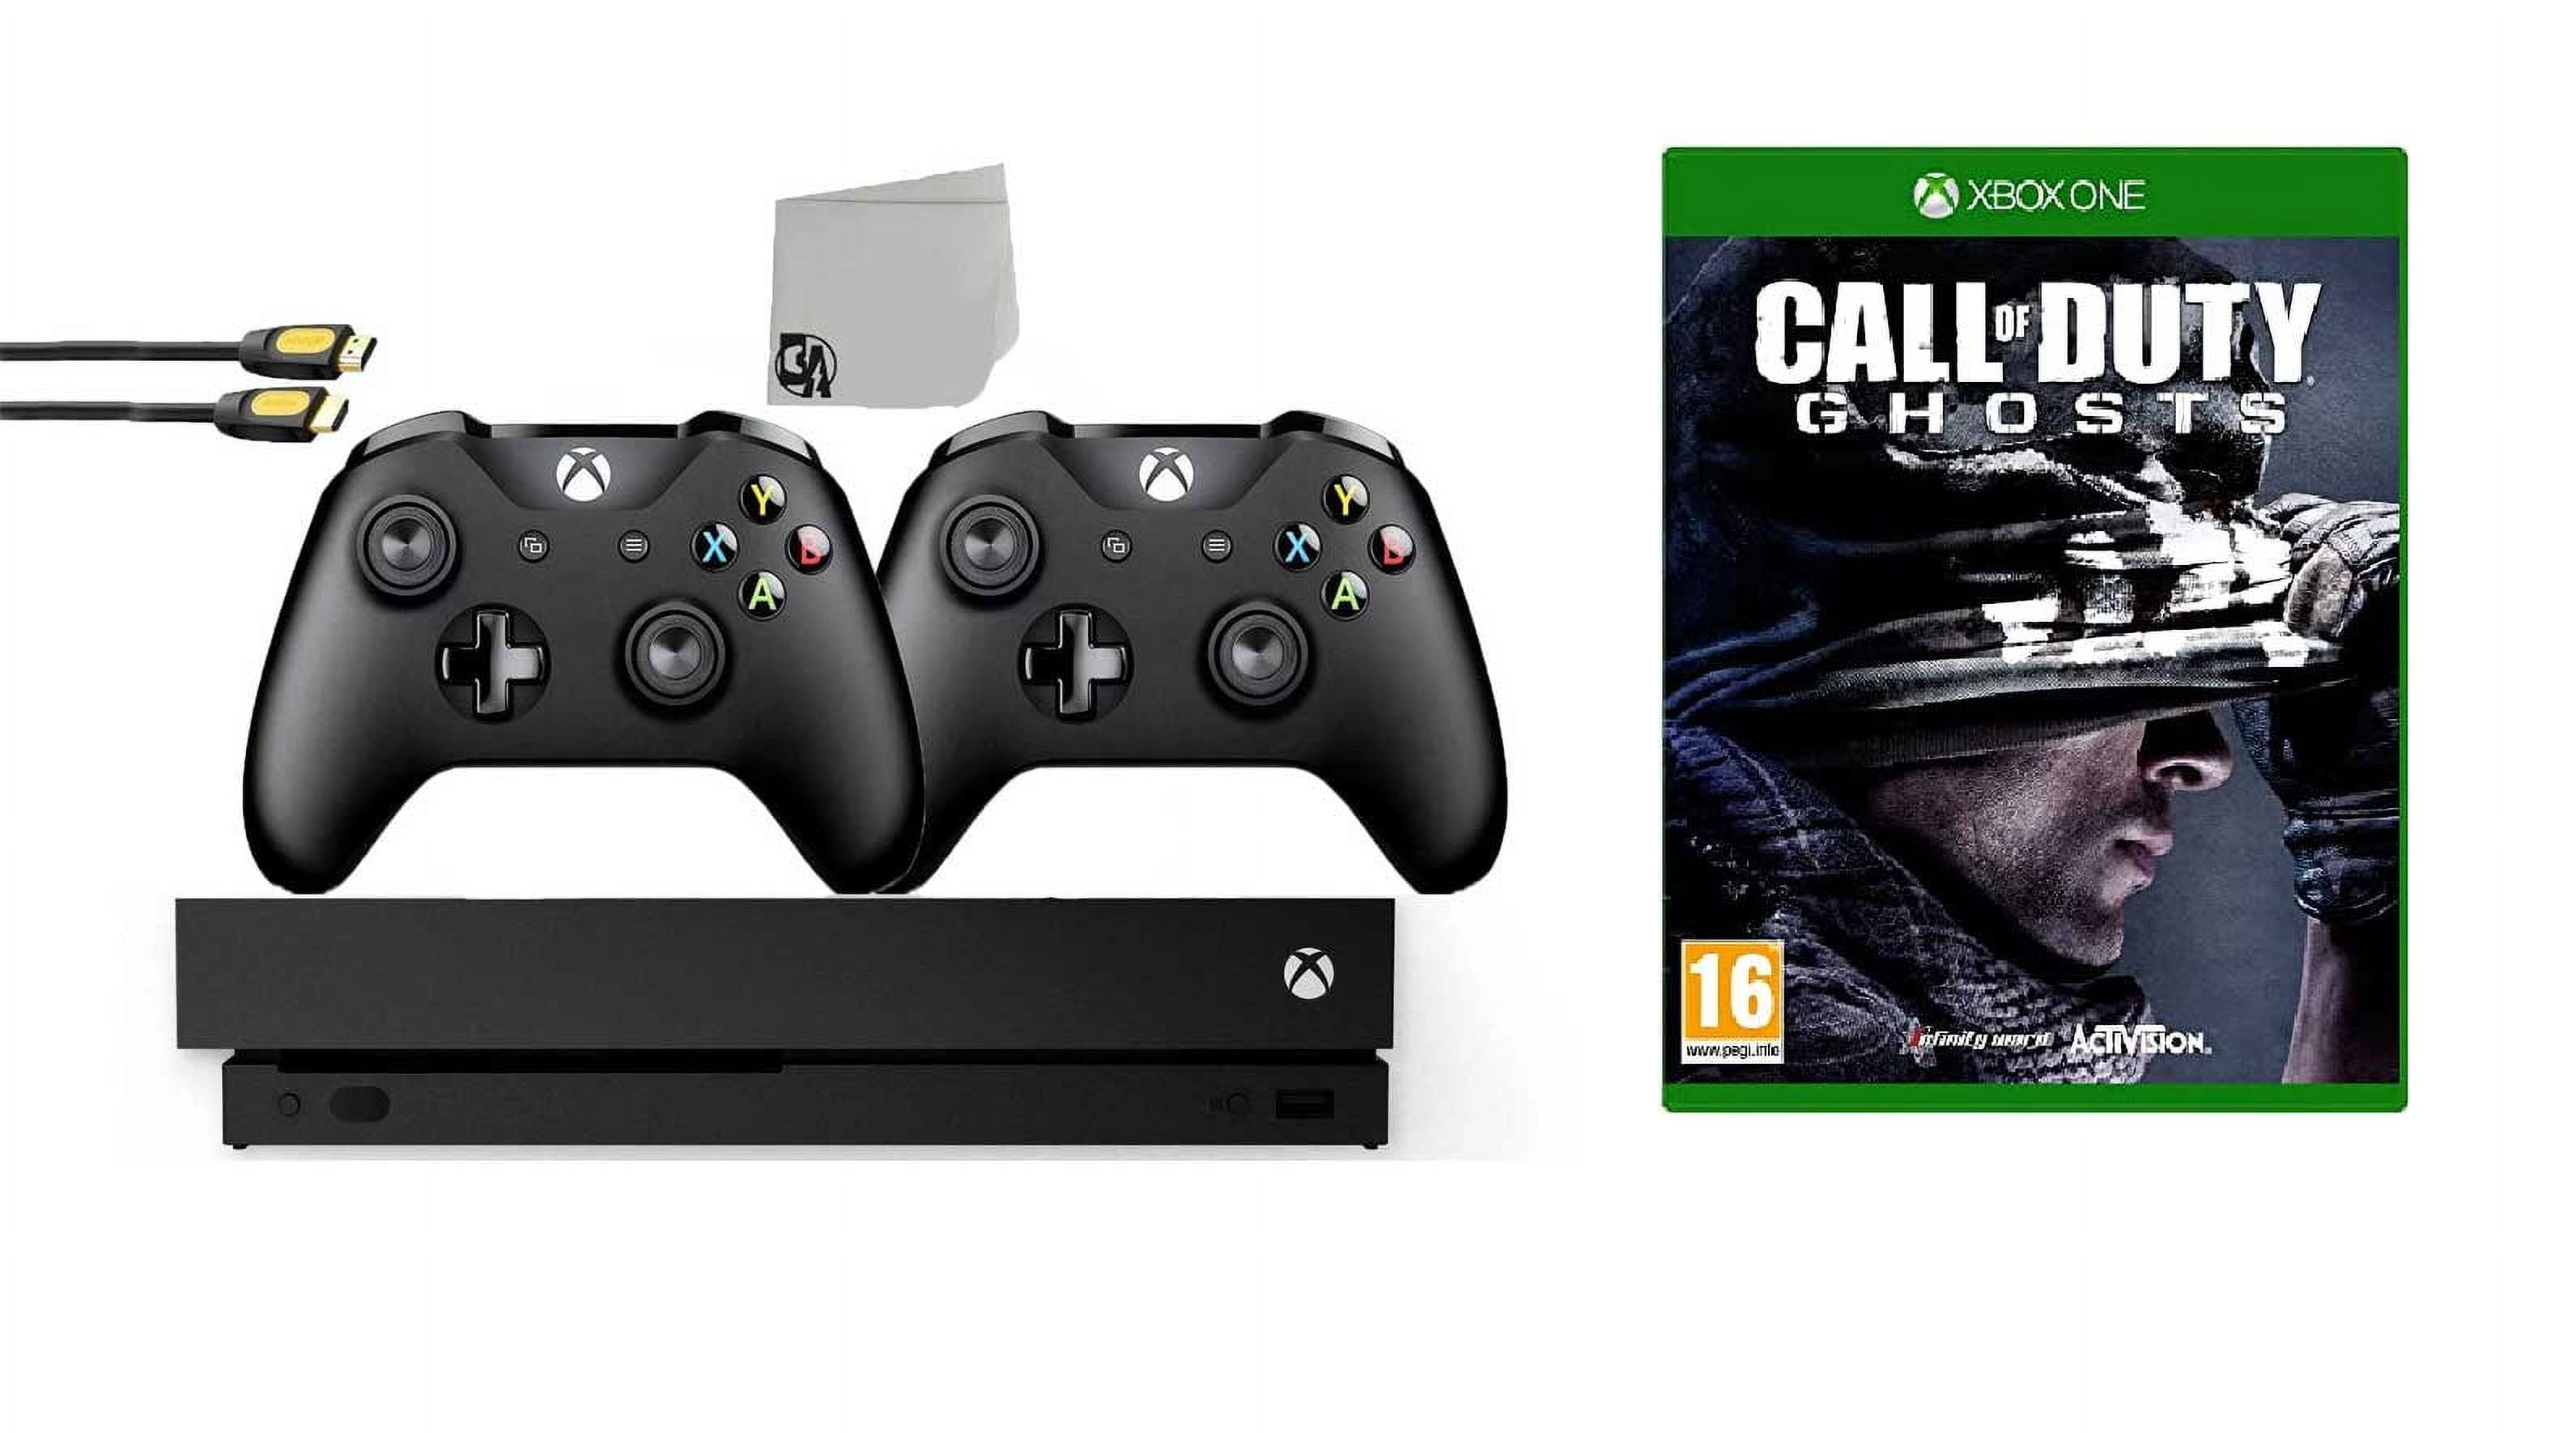 Call of duty Ghosts videogame on Microsoft XBOX One – Stock